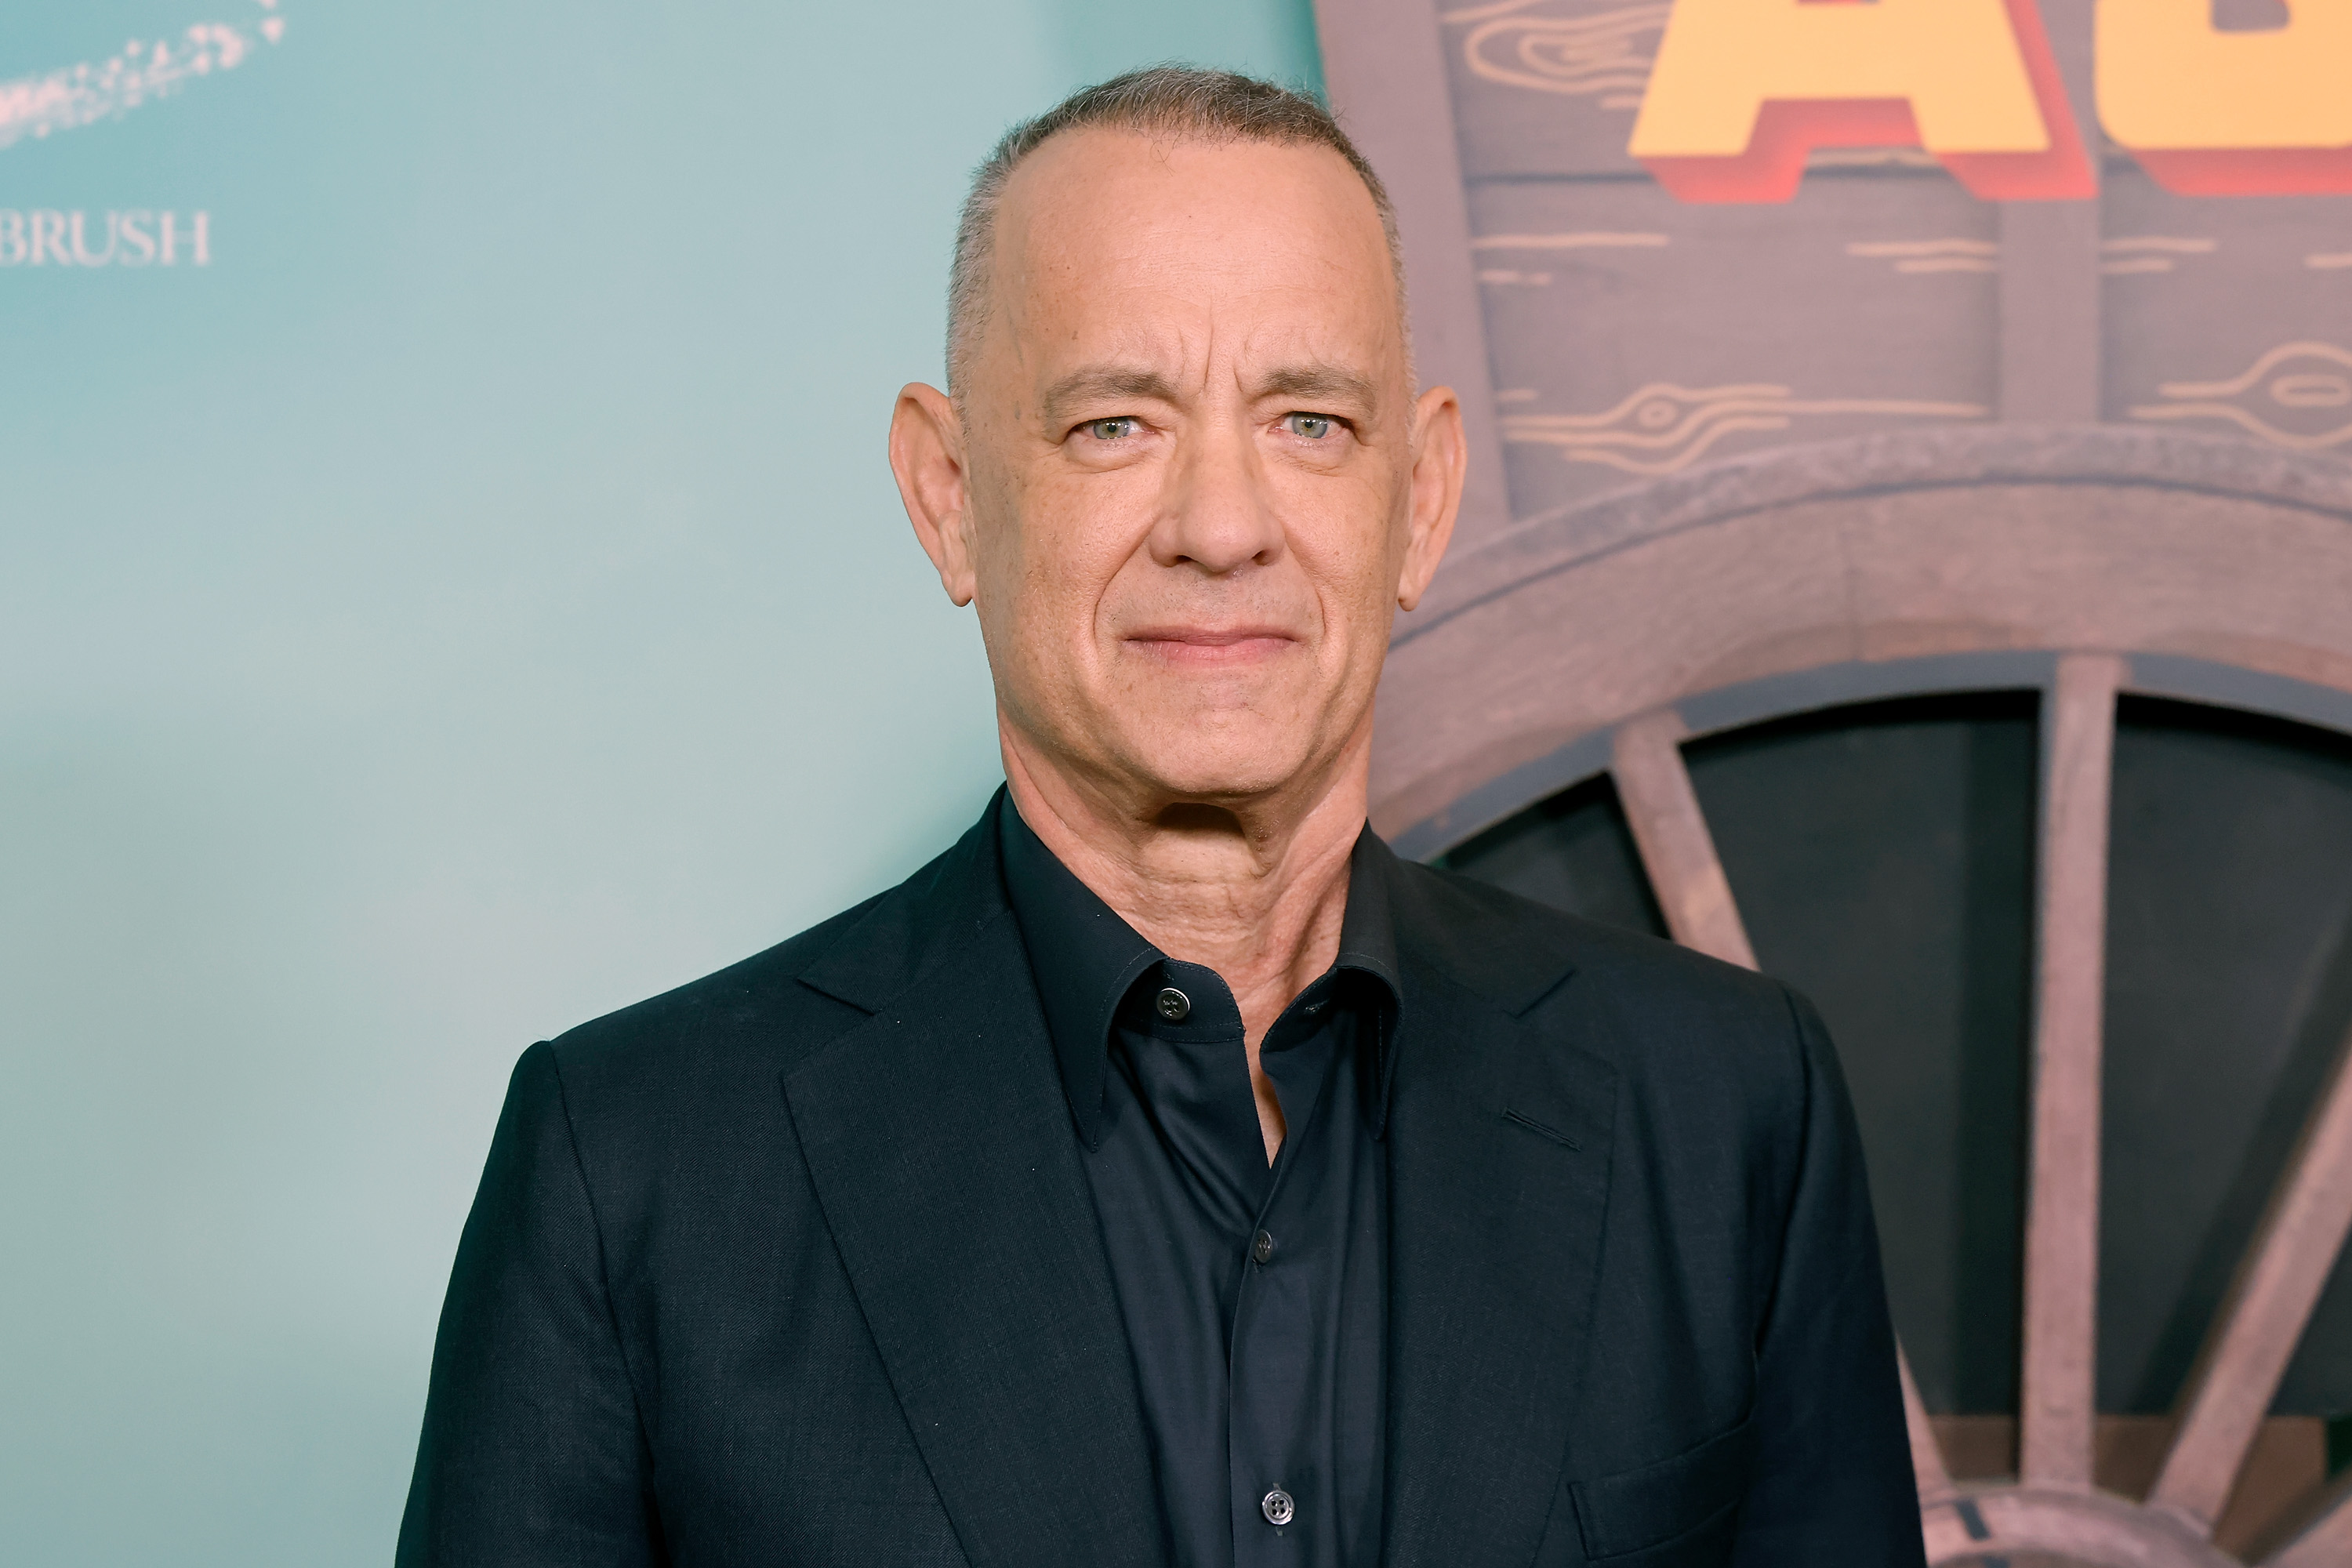 NEW YORK, NEW YORK - JUNE 13: Tom Hanks attends the New York premiere of "Asteroid City" at Alice Tully Hall on June 13, 2023 in New York City.